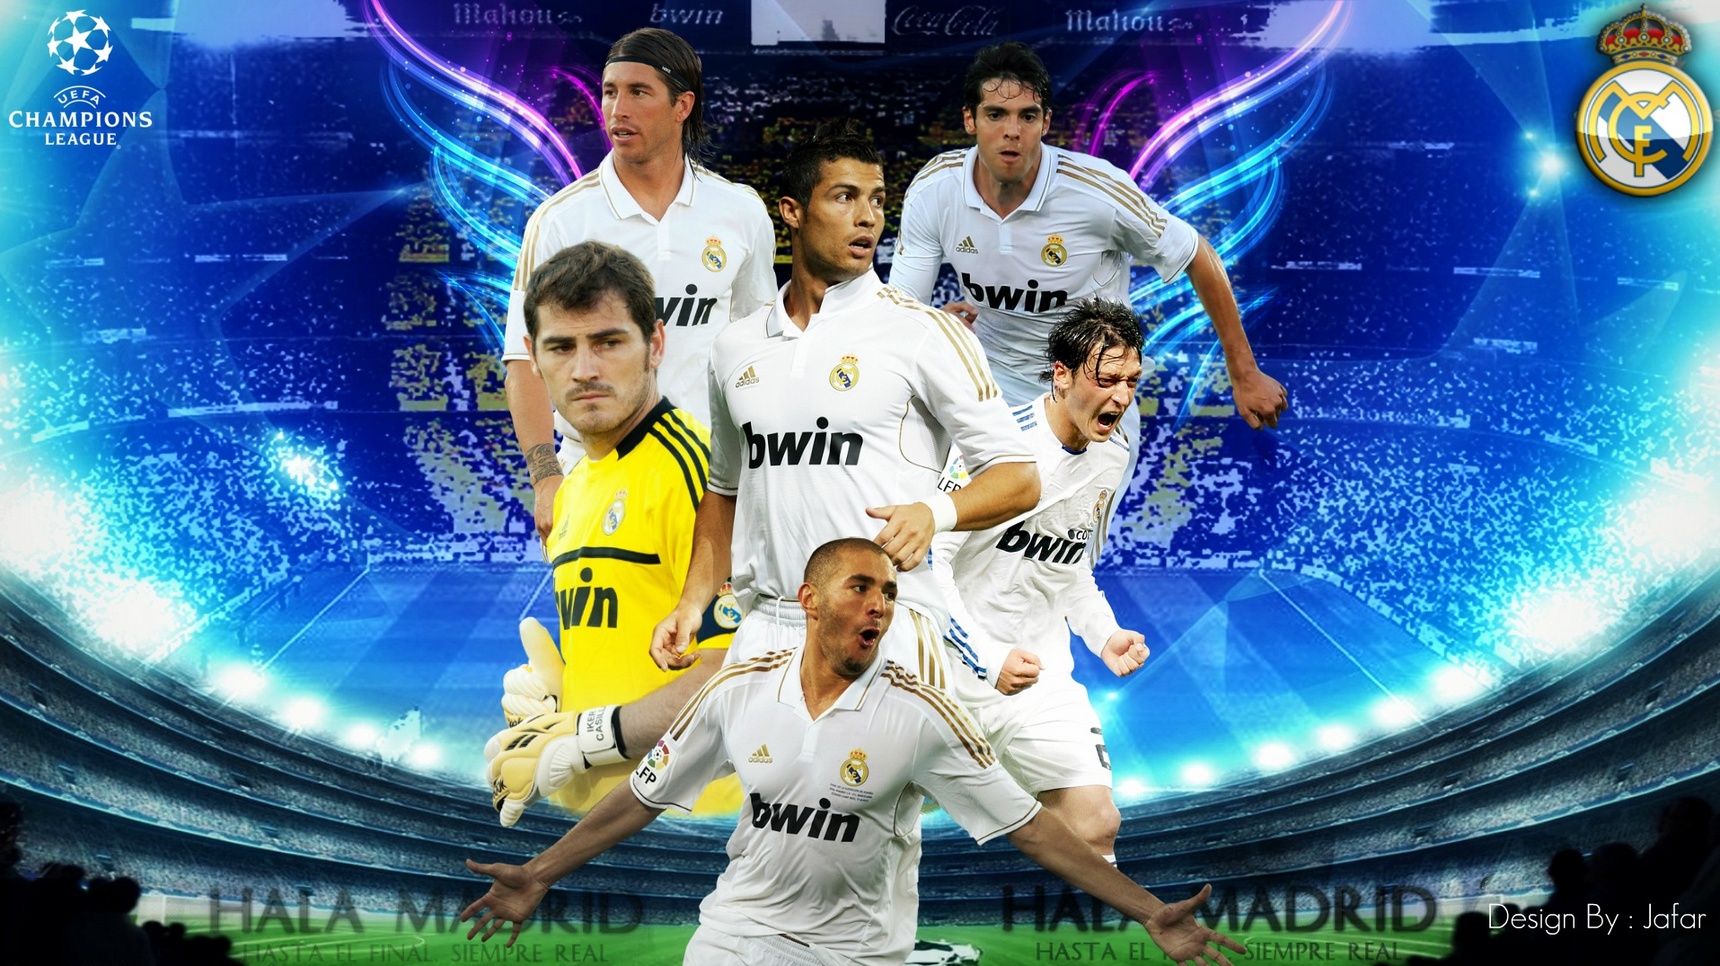 wallpaper pemain real madrid,player,soccer player,football player,product,sport venue